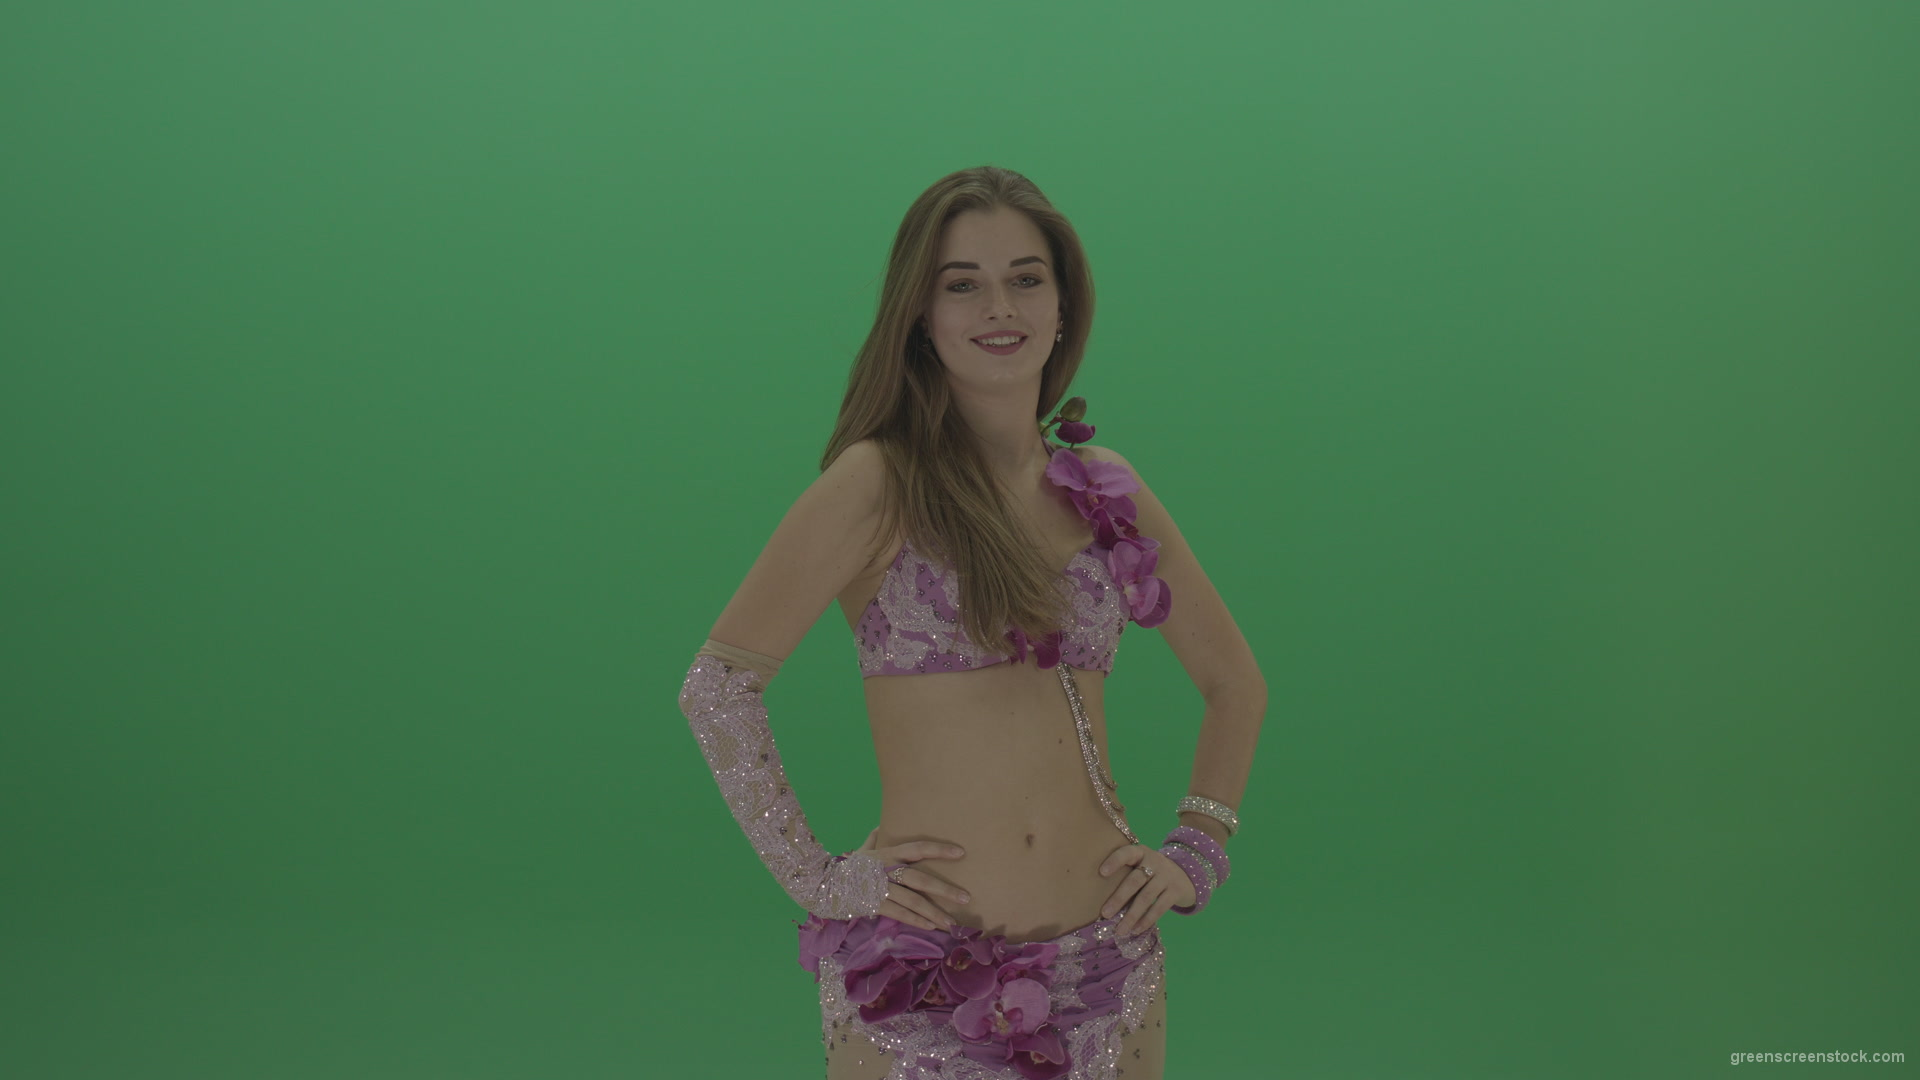 Beautiful-belly-dancer-in-purple-wear-winks-as-she-poses-over-green-screen-background_001 Green Screen Stock